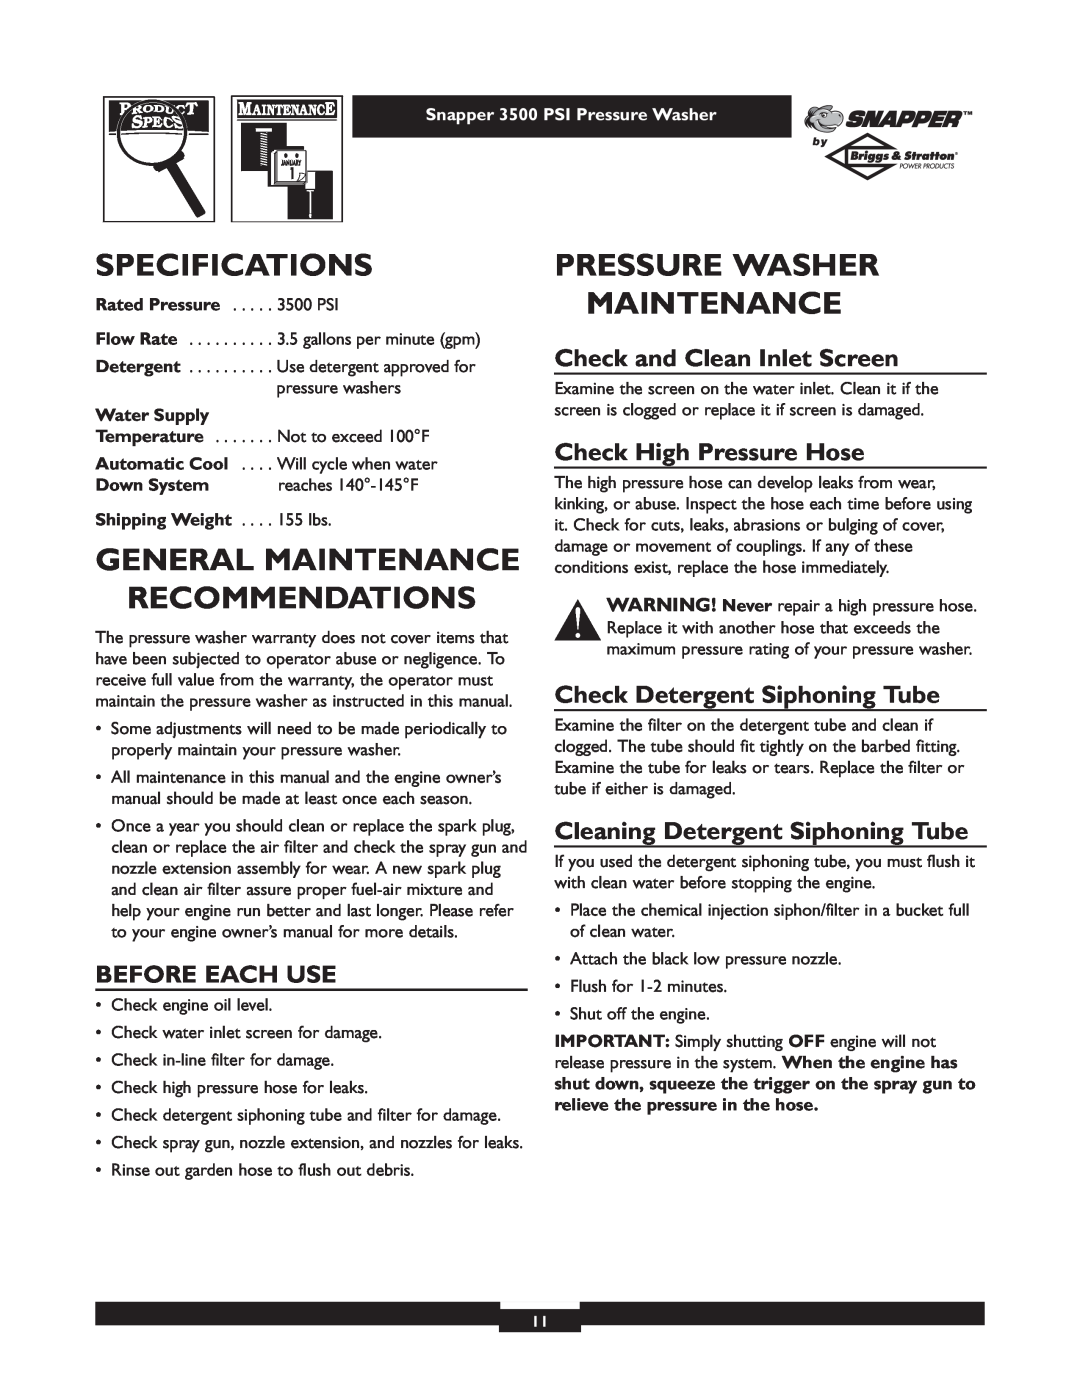 Briggs & Stratton 3500PSI Specifications, General Maintenance Recommendations, Pressure Washer Maintenance, Water Supply 